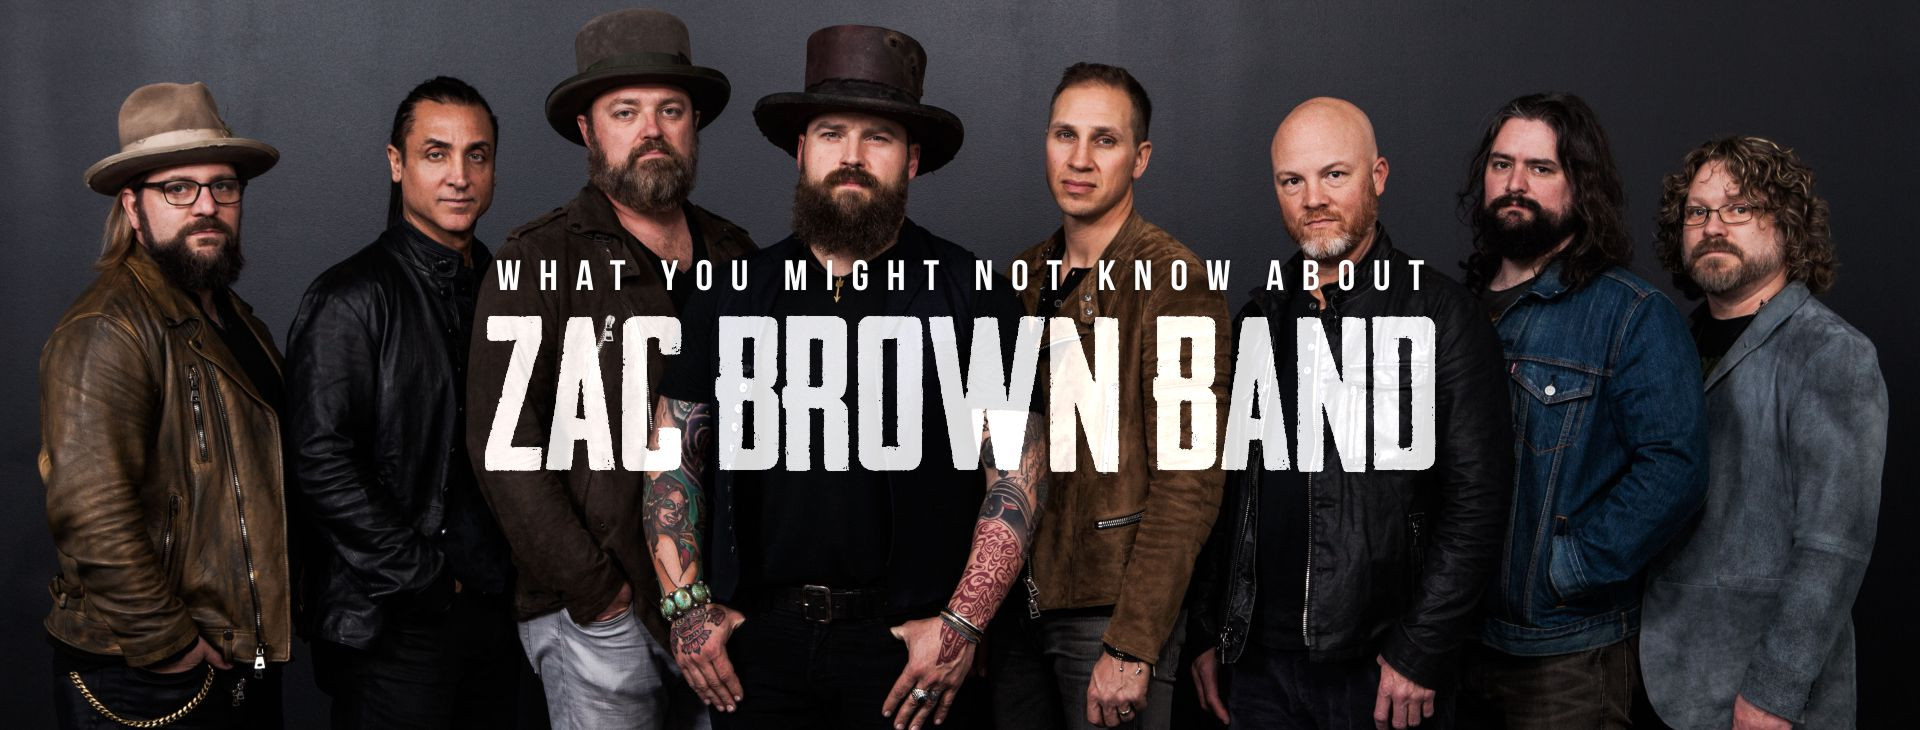 Chicken Fried Zac Brown Band
 11 Things You May Not Know About Zac Brown Band